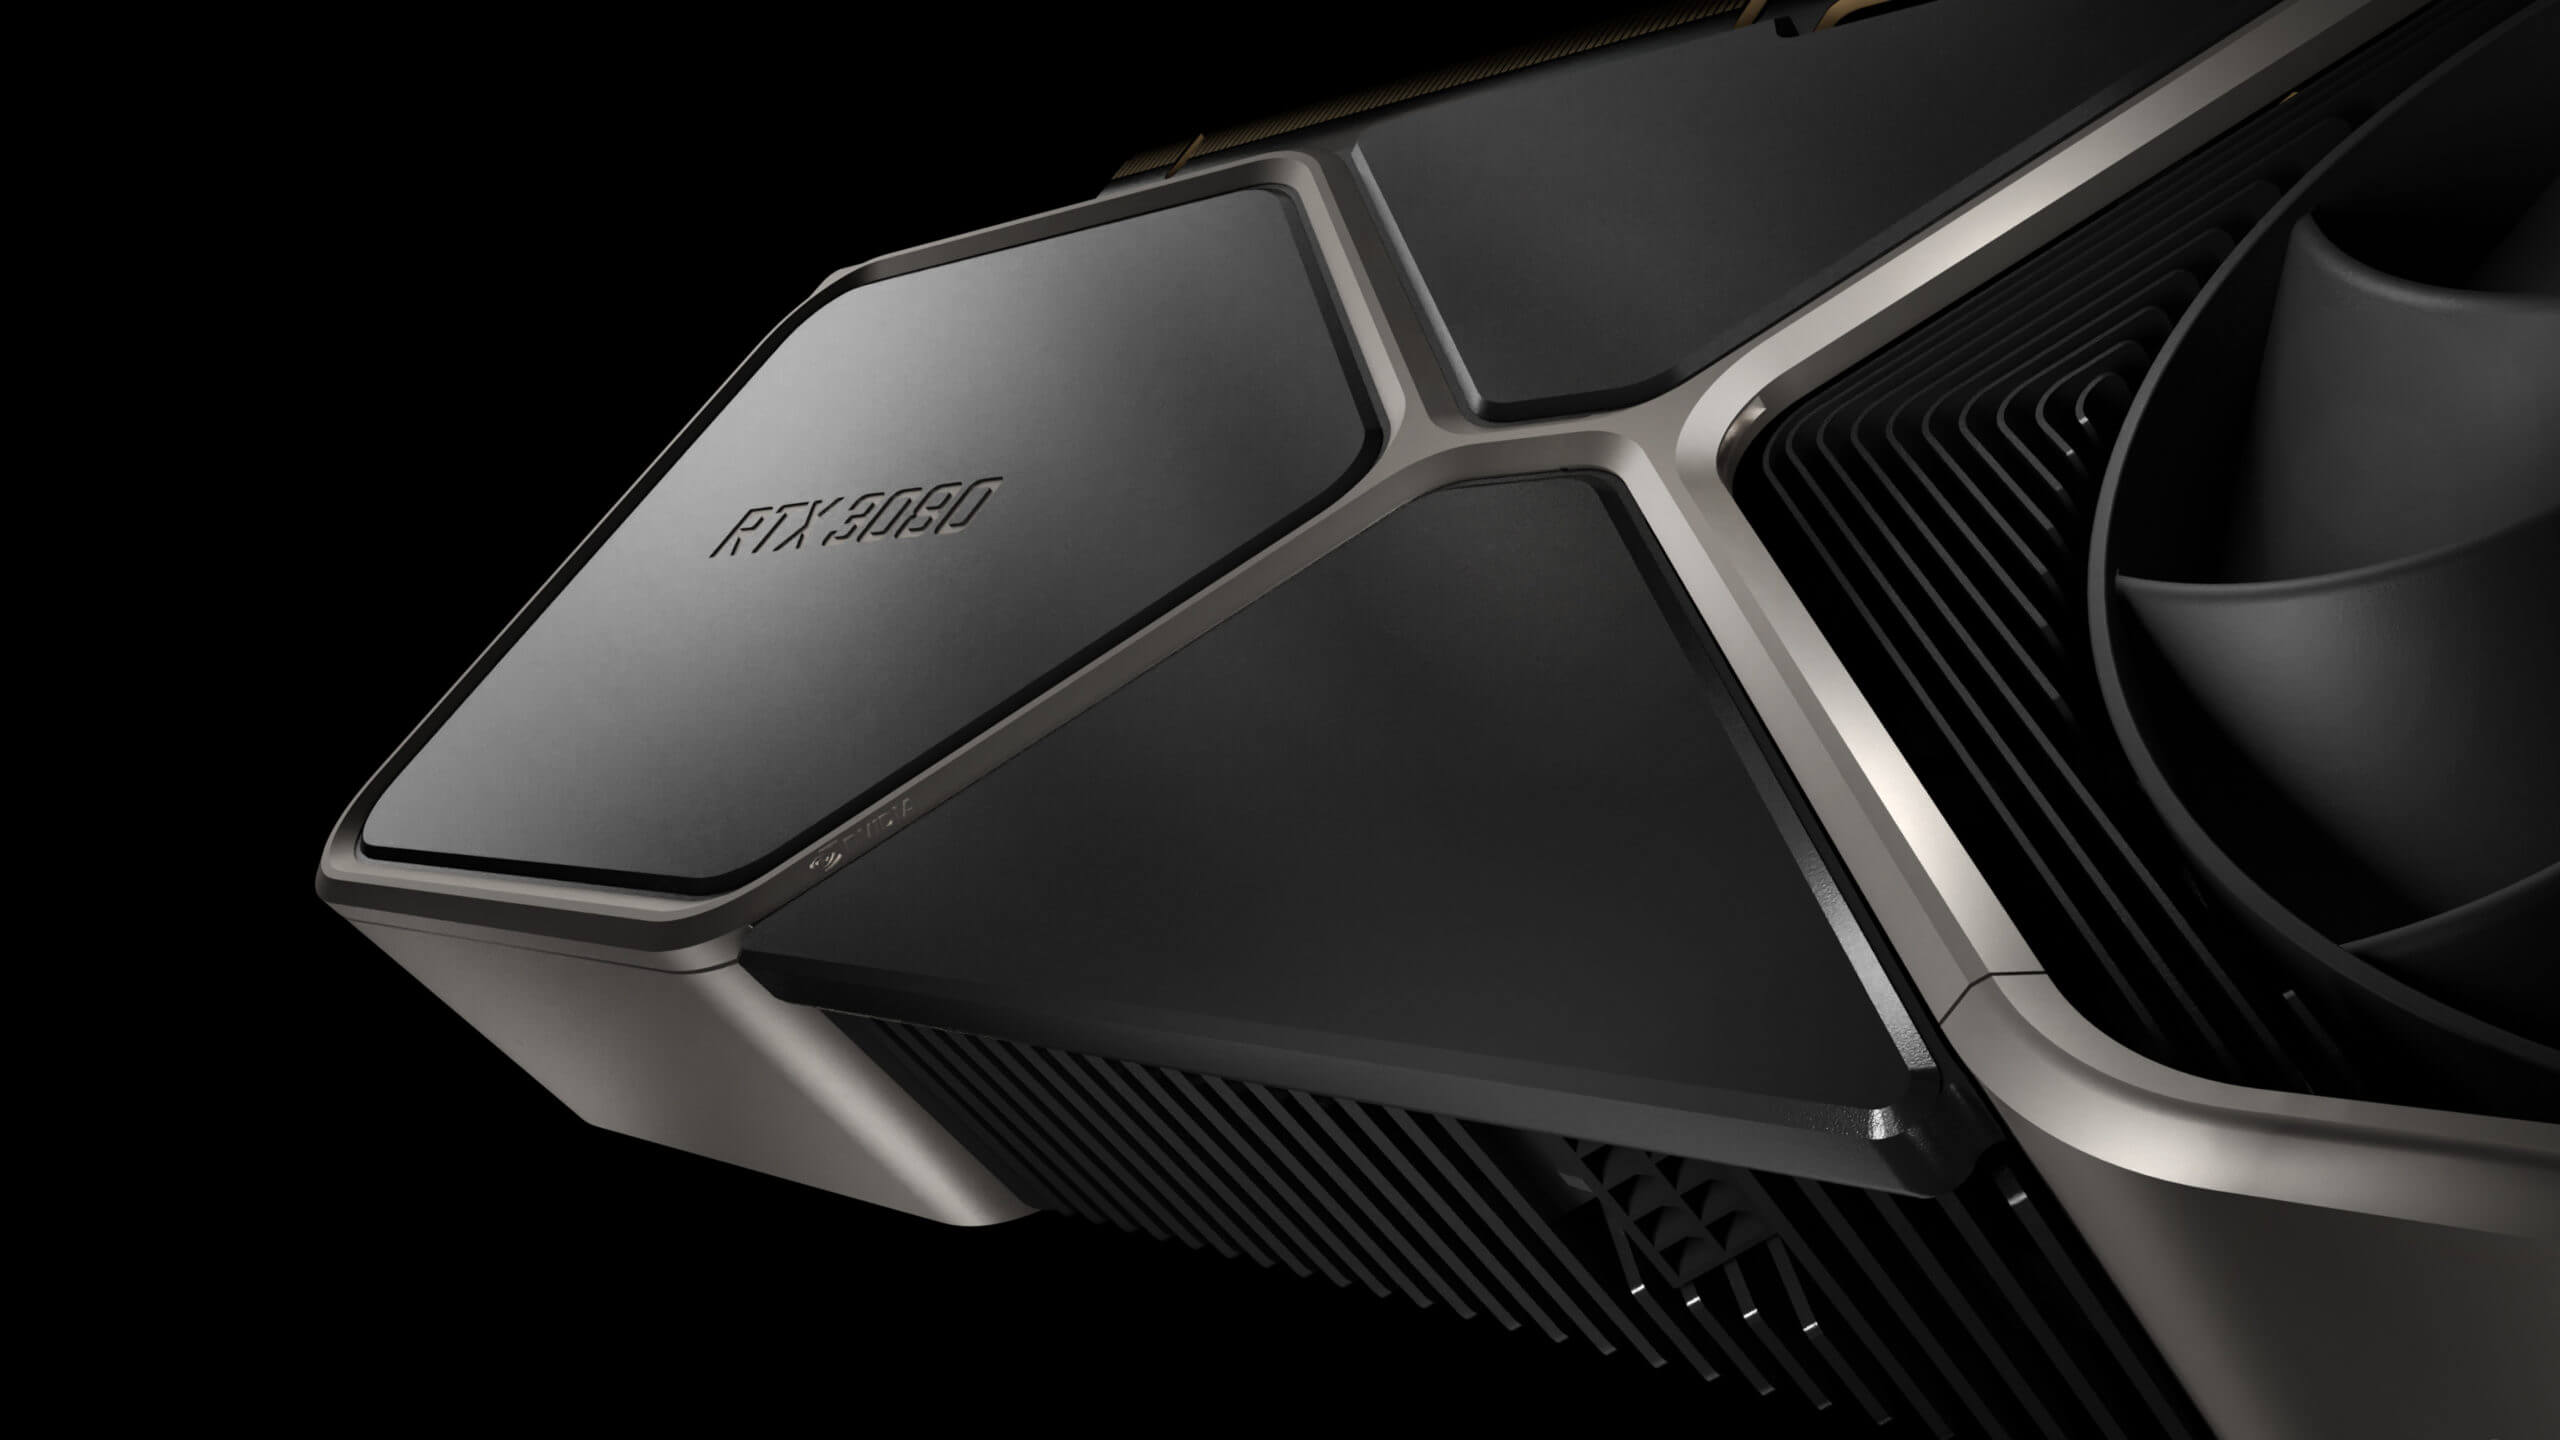 geforce-rtx-3080-product-gallery-full-screen-3840-3-scaled1.jpg